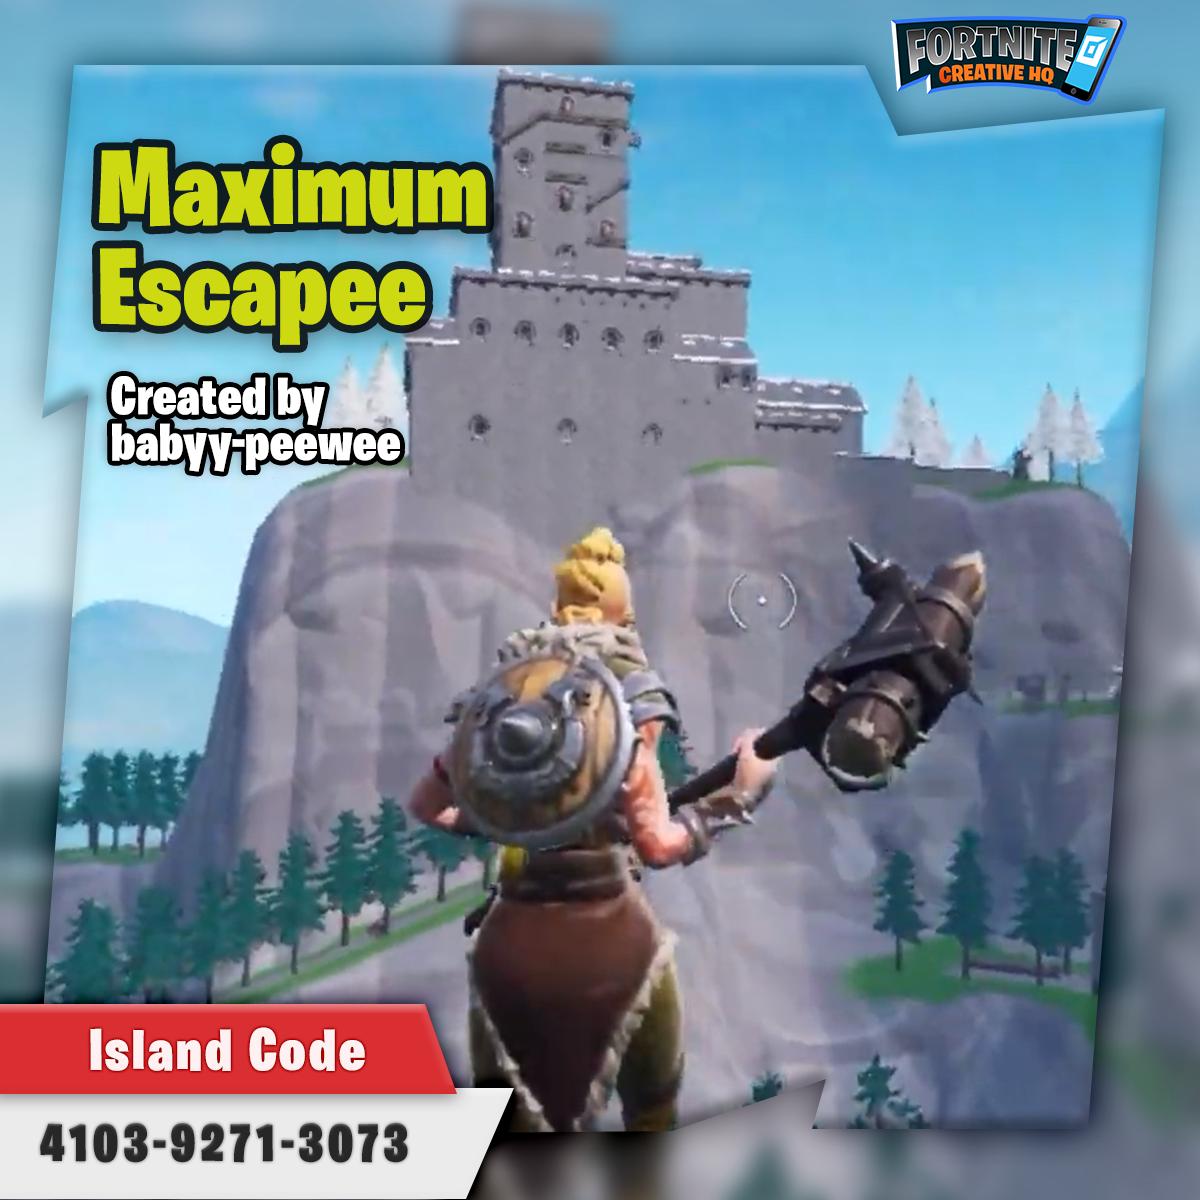 Fchq Fortnite Maps On Twitter Fortnite Parkour Time Check Out The Maximum Escapee By Babyy Peewee Be Prepared To Take Over The Castle In The Snowy Mountain Can You Escape The Prison